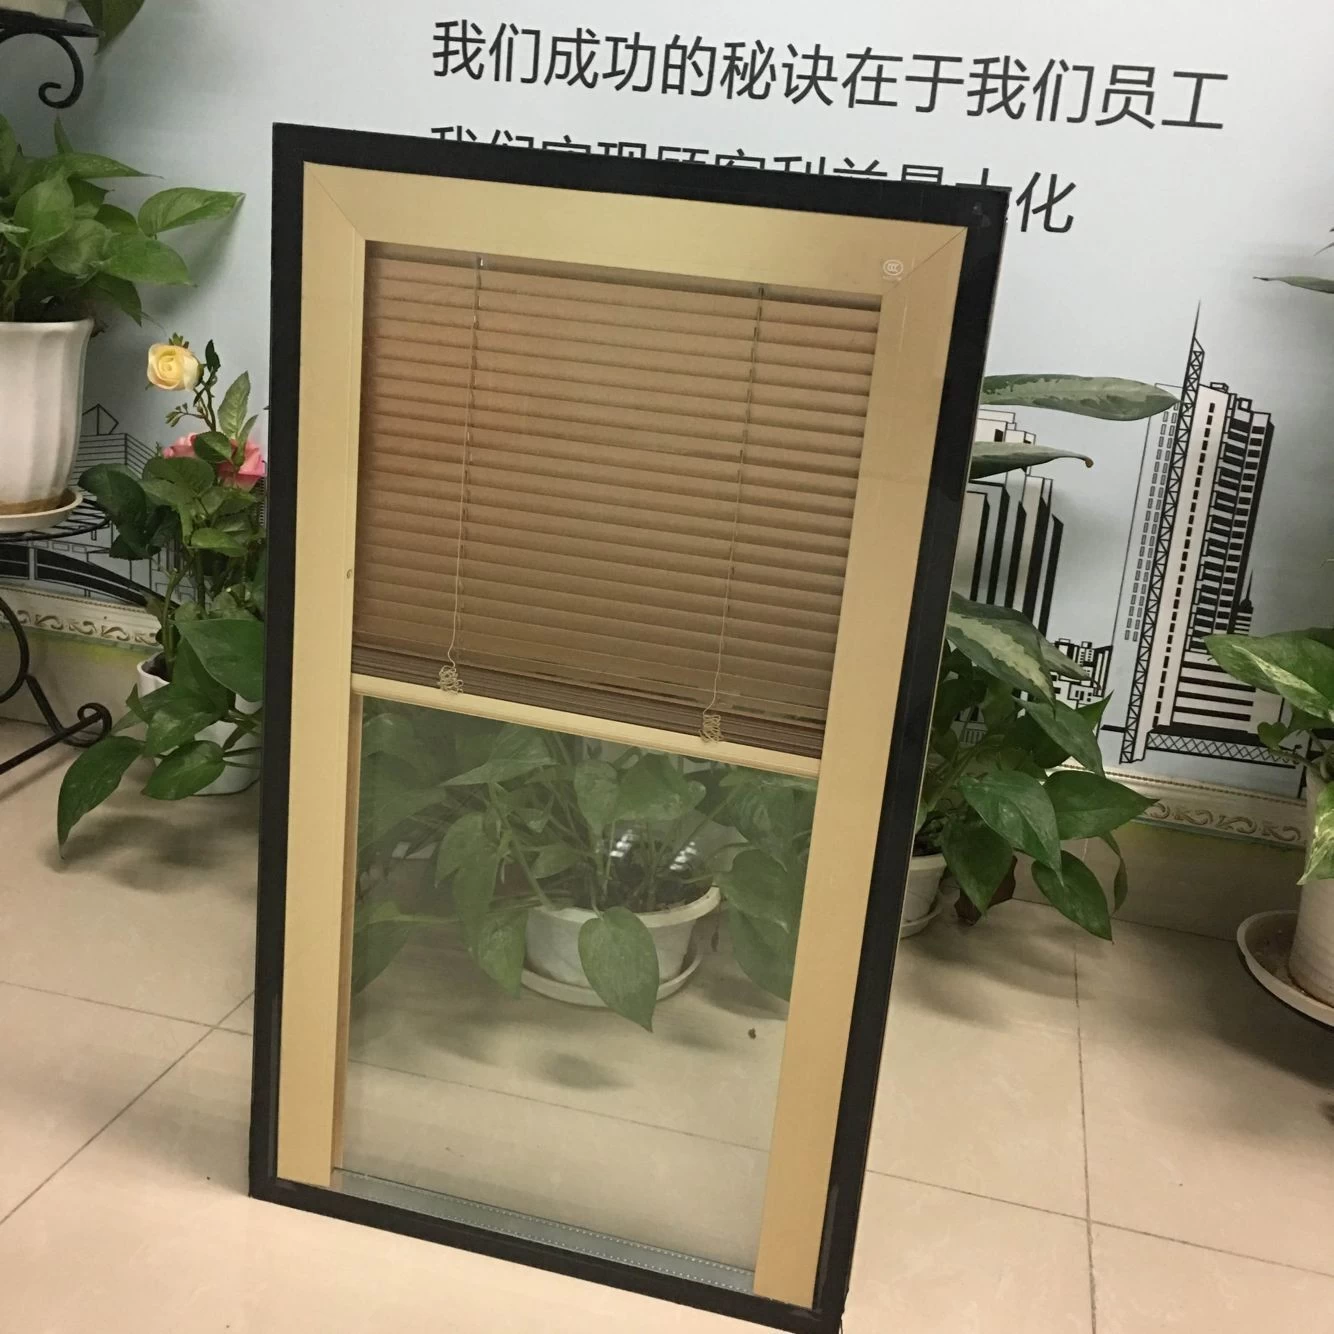 China internally installed louver insulated glass for window,louver IGU glass window,energy saving inner installed louver hollow glass manufacturer